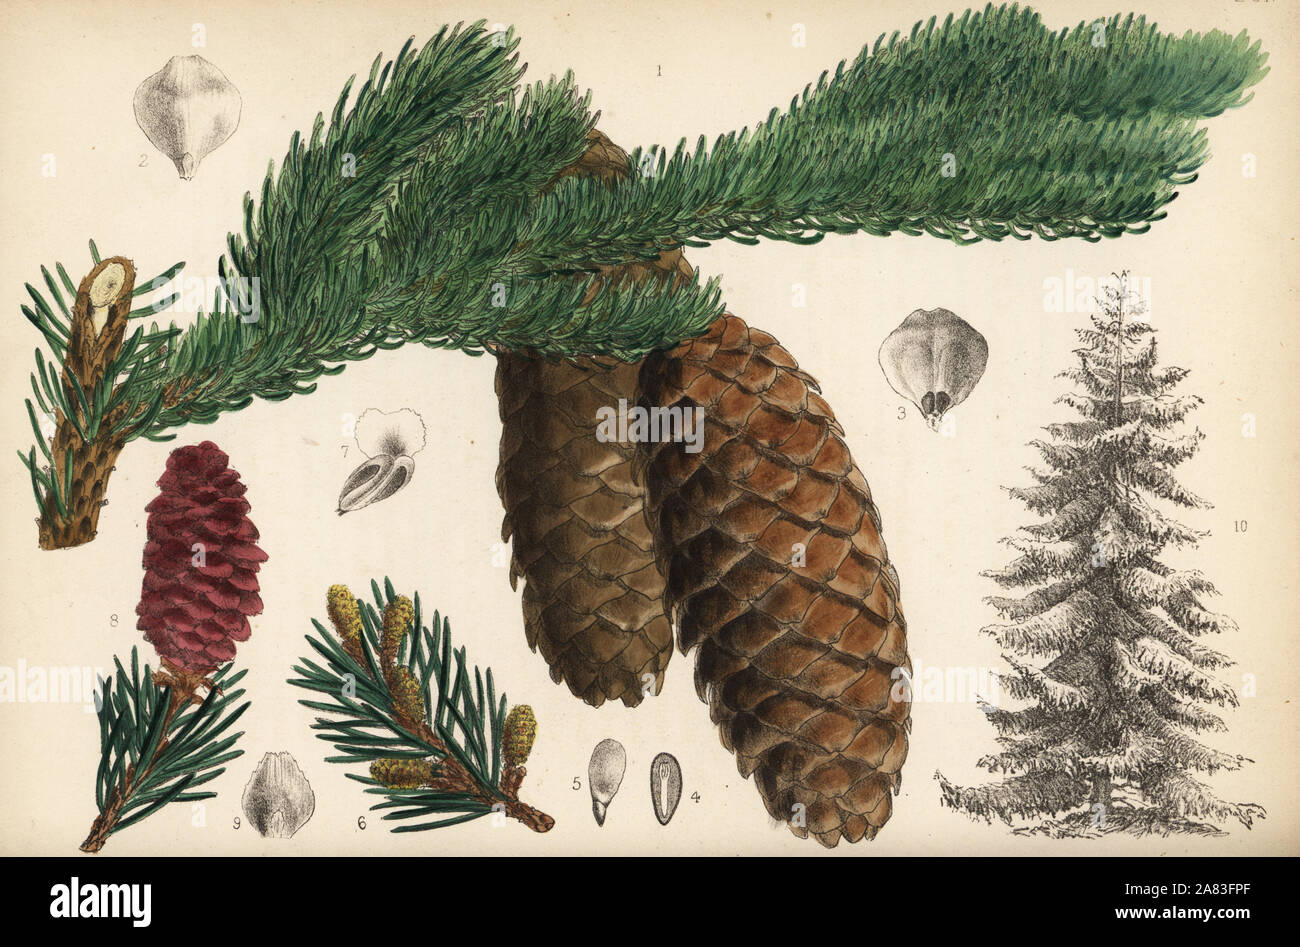 Spruce fir or Norway spruce, Picea abies (Pinus picea). Handcoloured lithograph by Hanhart after a botanical illustration by David Blair from Robert Bentley and Henry Trimen's Medicinal Plants, London, 1880. Stock Photo